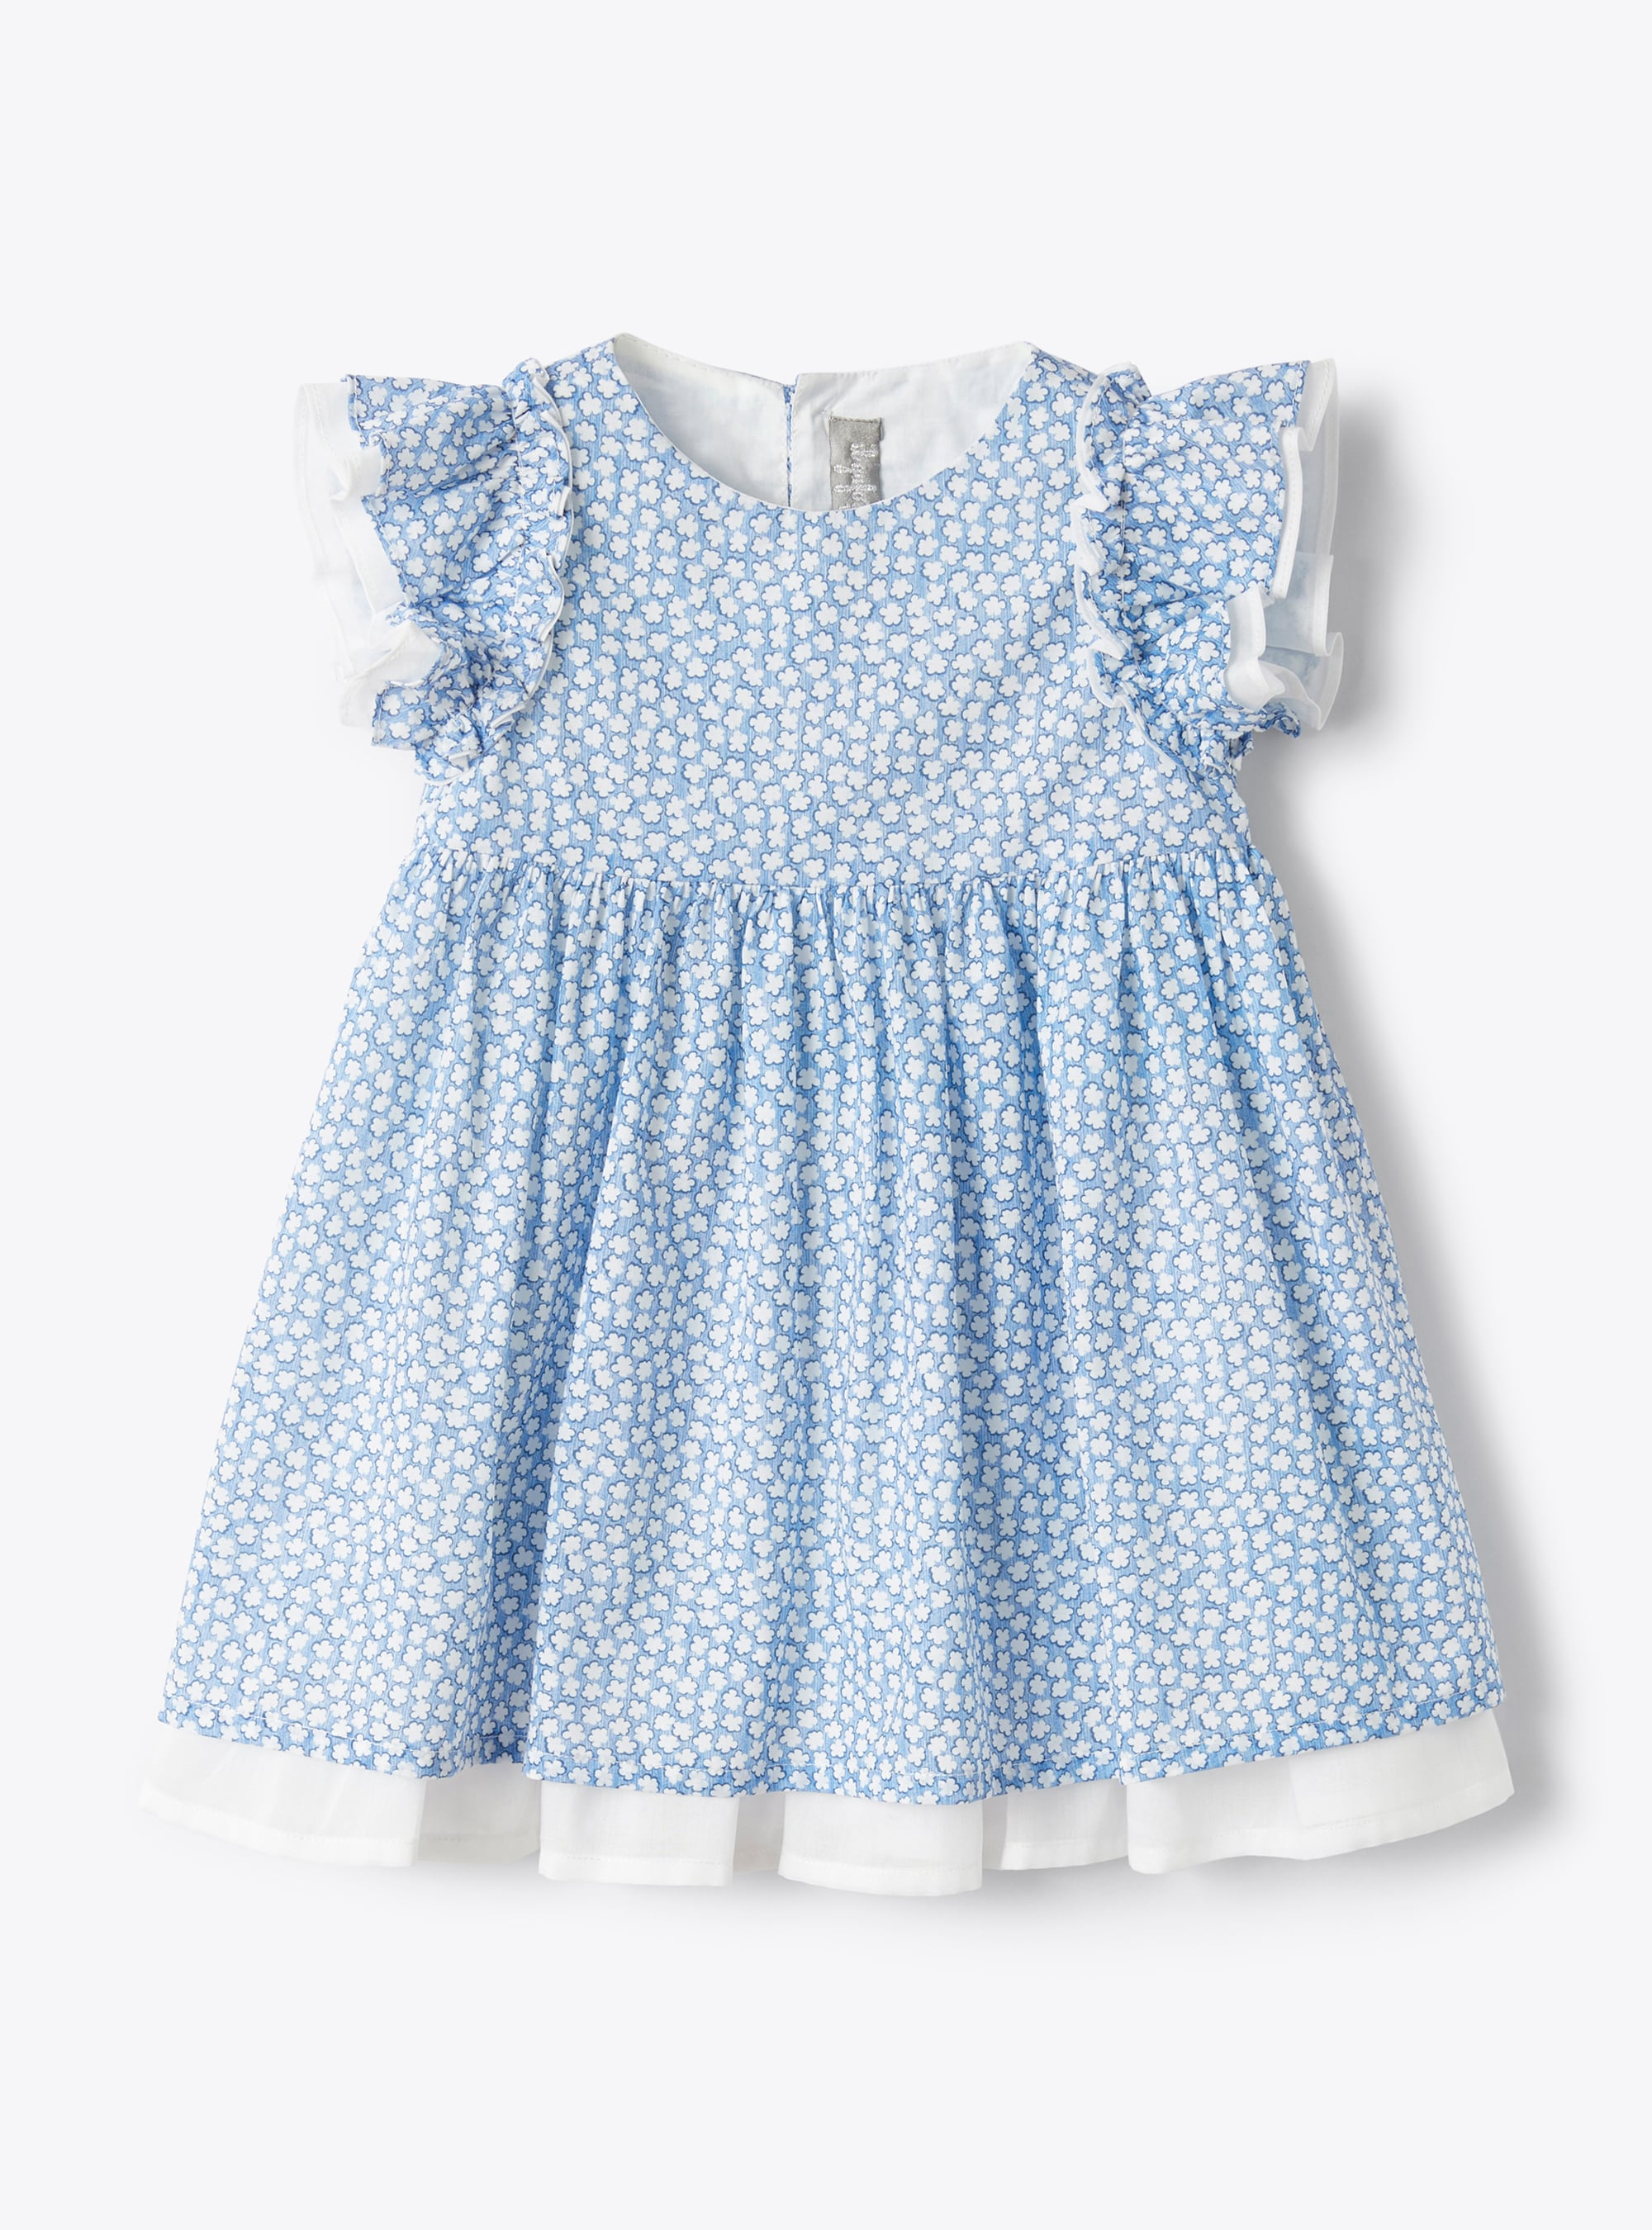 Floral-printed dress for baby girls in cobalt blue - Dresses - Il Gufo